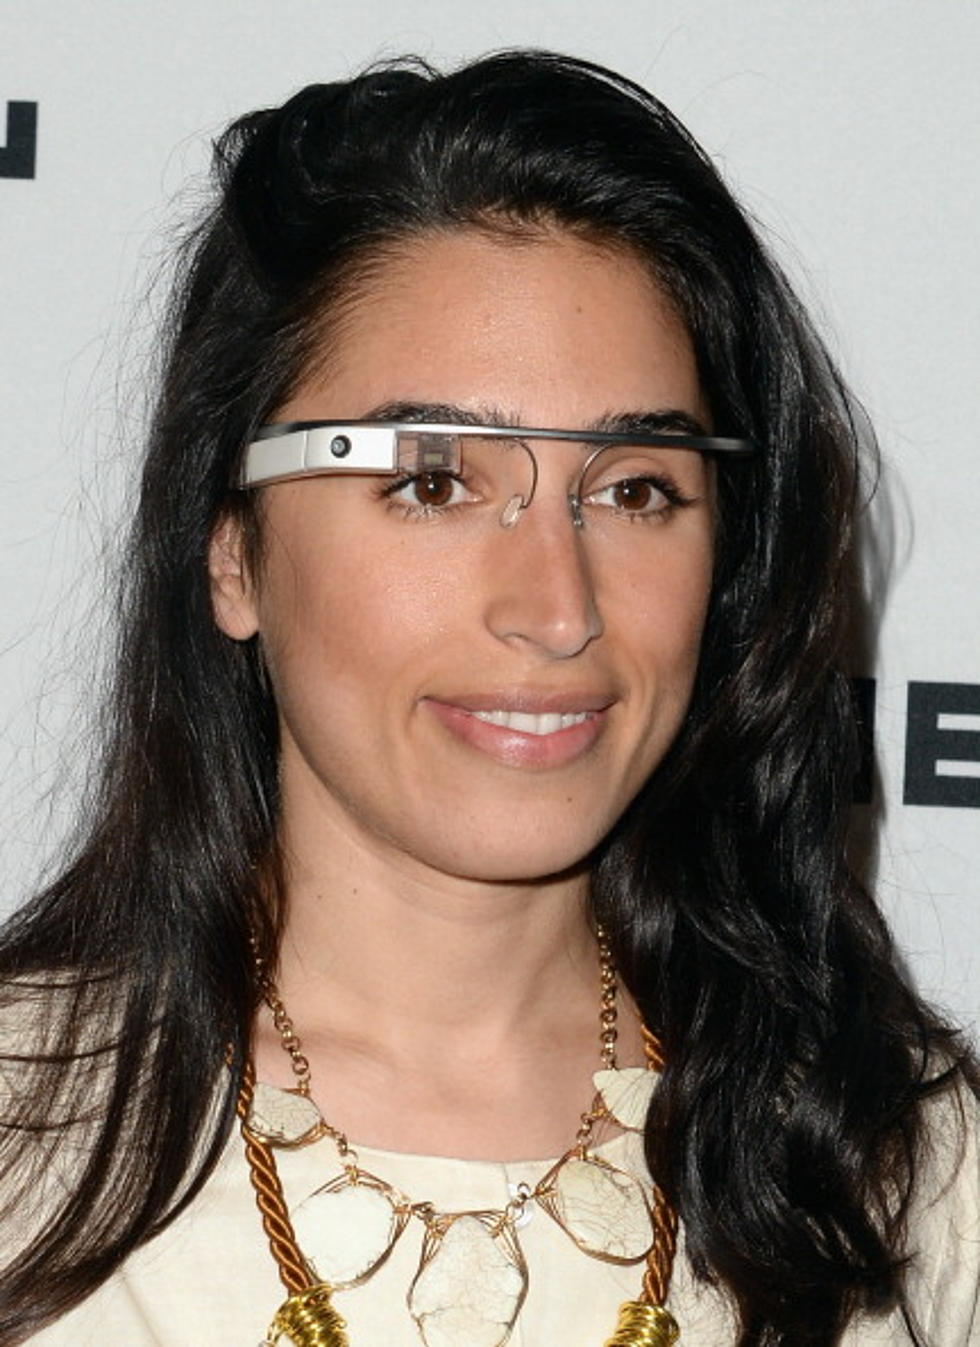 Google Glass – The Fascination